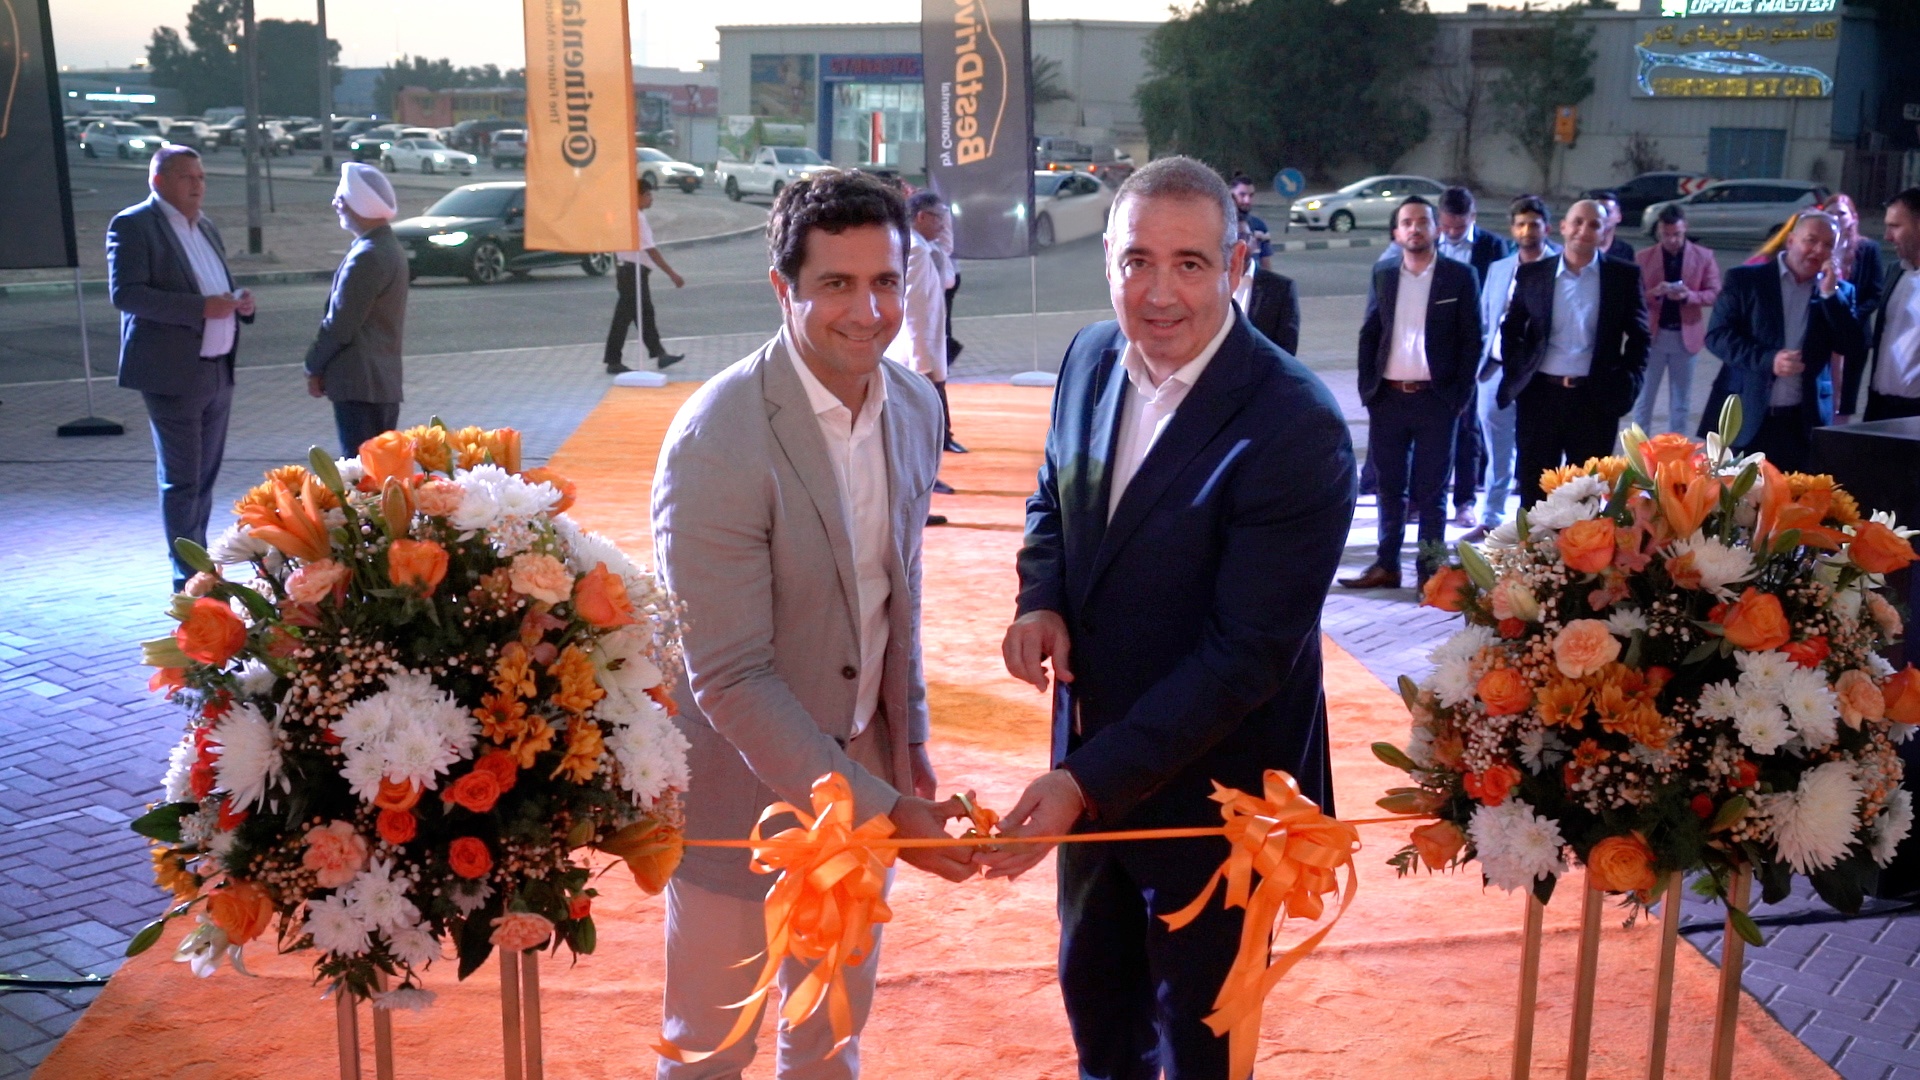 BestDrive by Continental Opens First Branch in Dubai